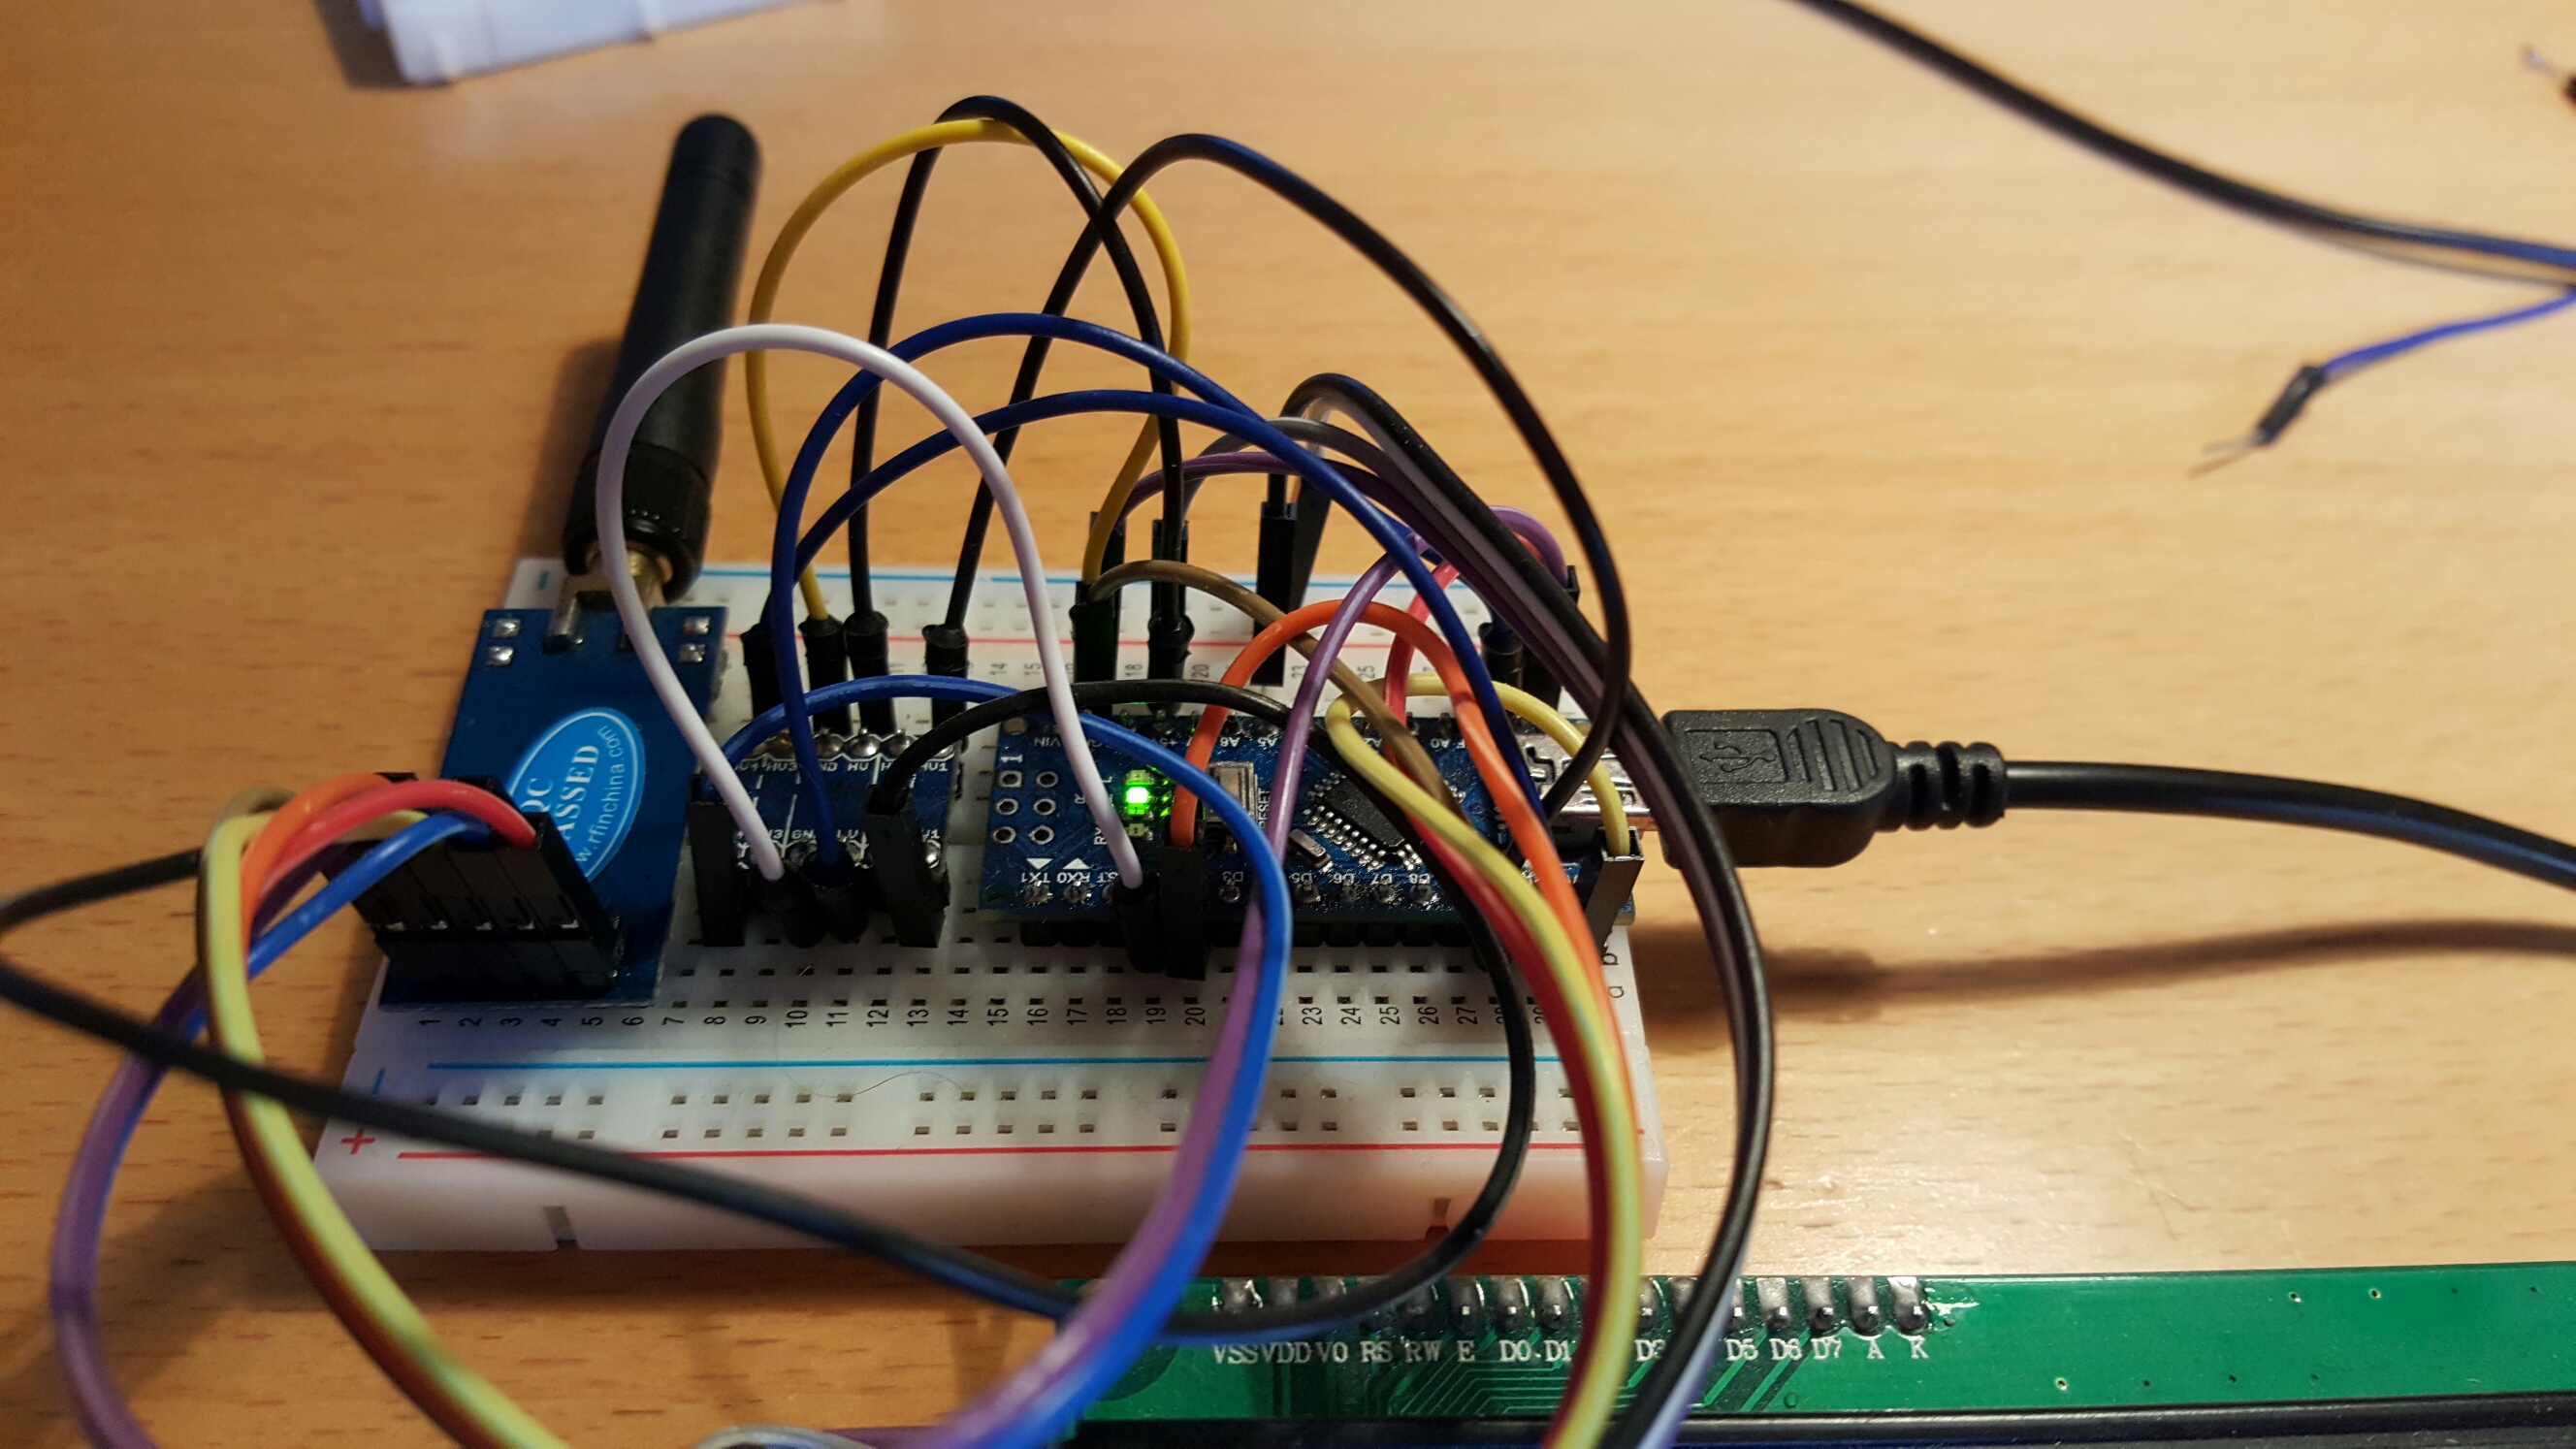 can bus sniffer arduino software